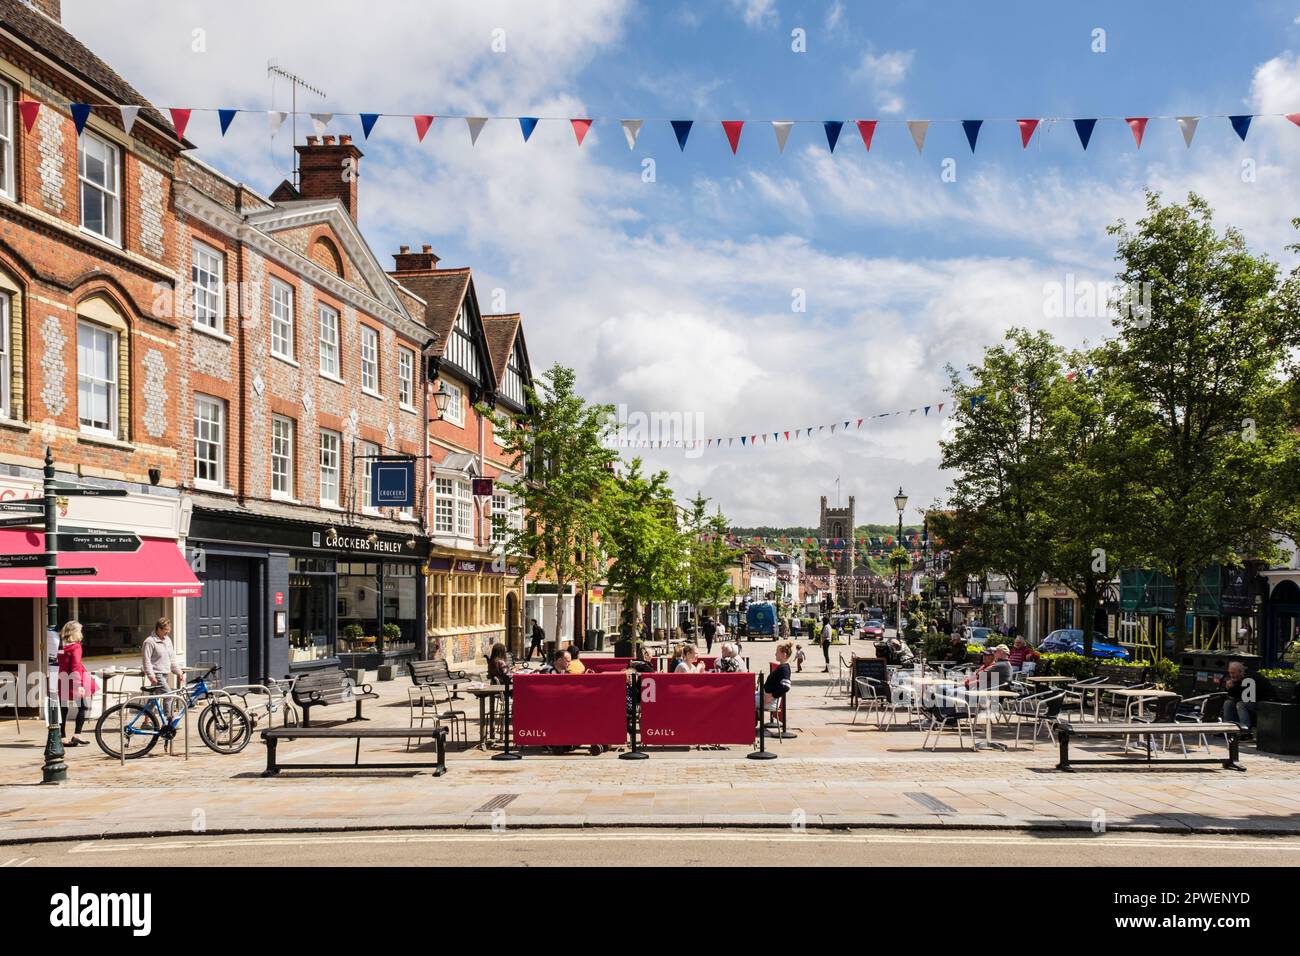 Street scene with people in outdoor cafes in town centre. Henley-on-Thames, Oxfordshire, England, UK, Britain Stock Photo